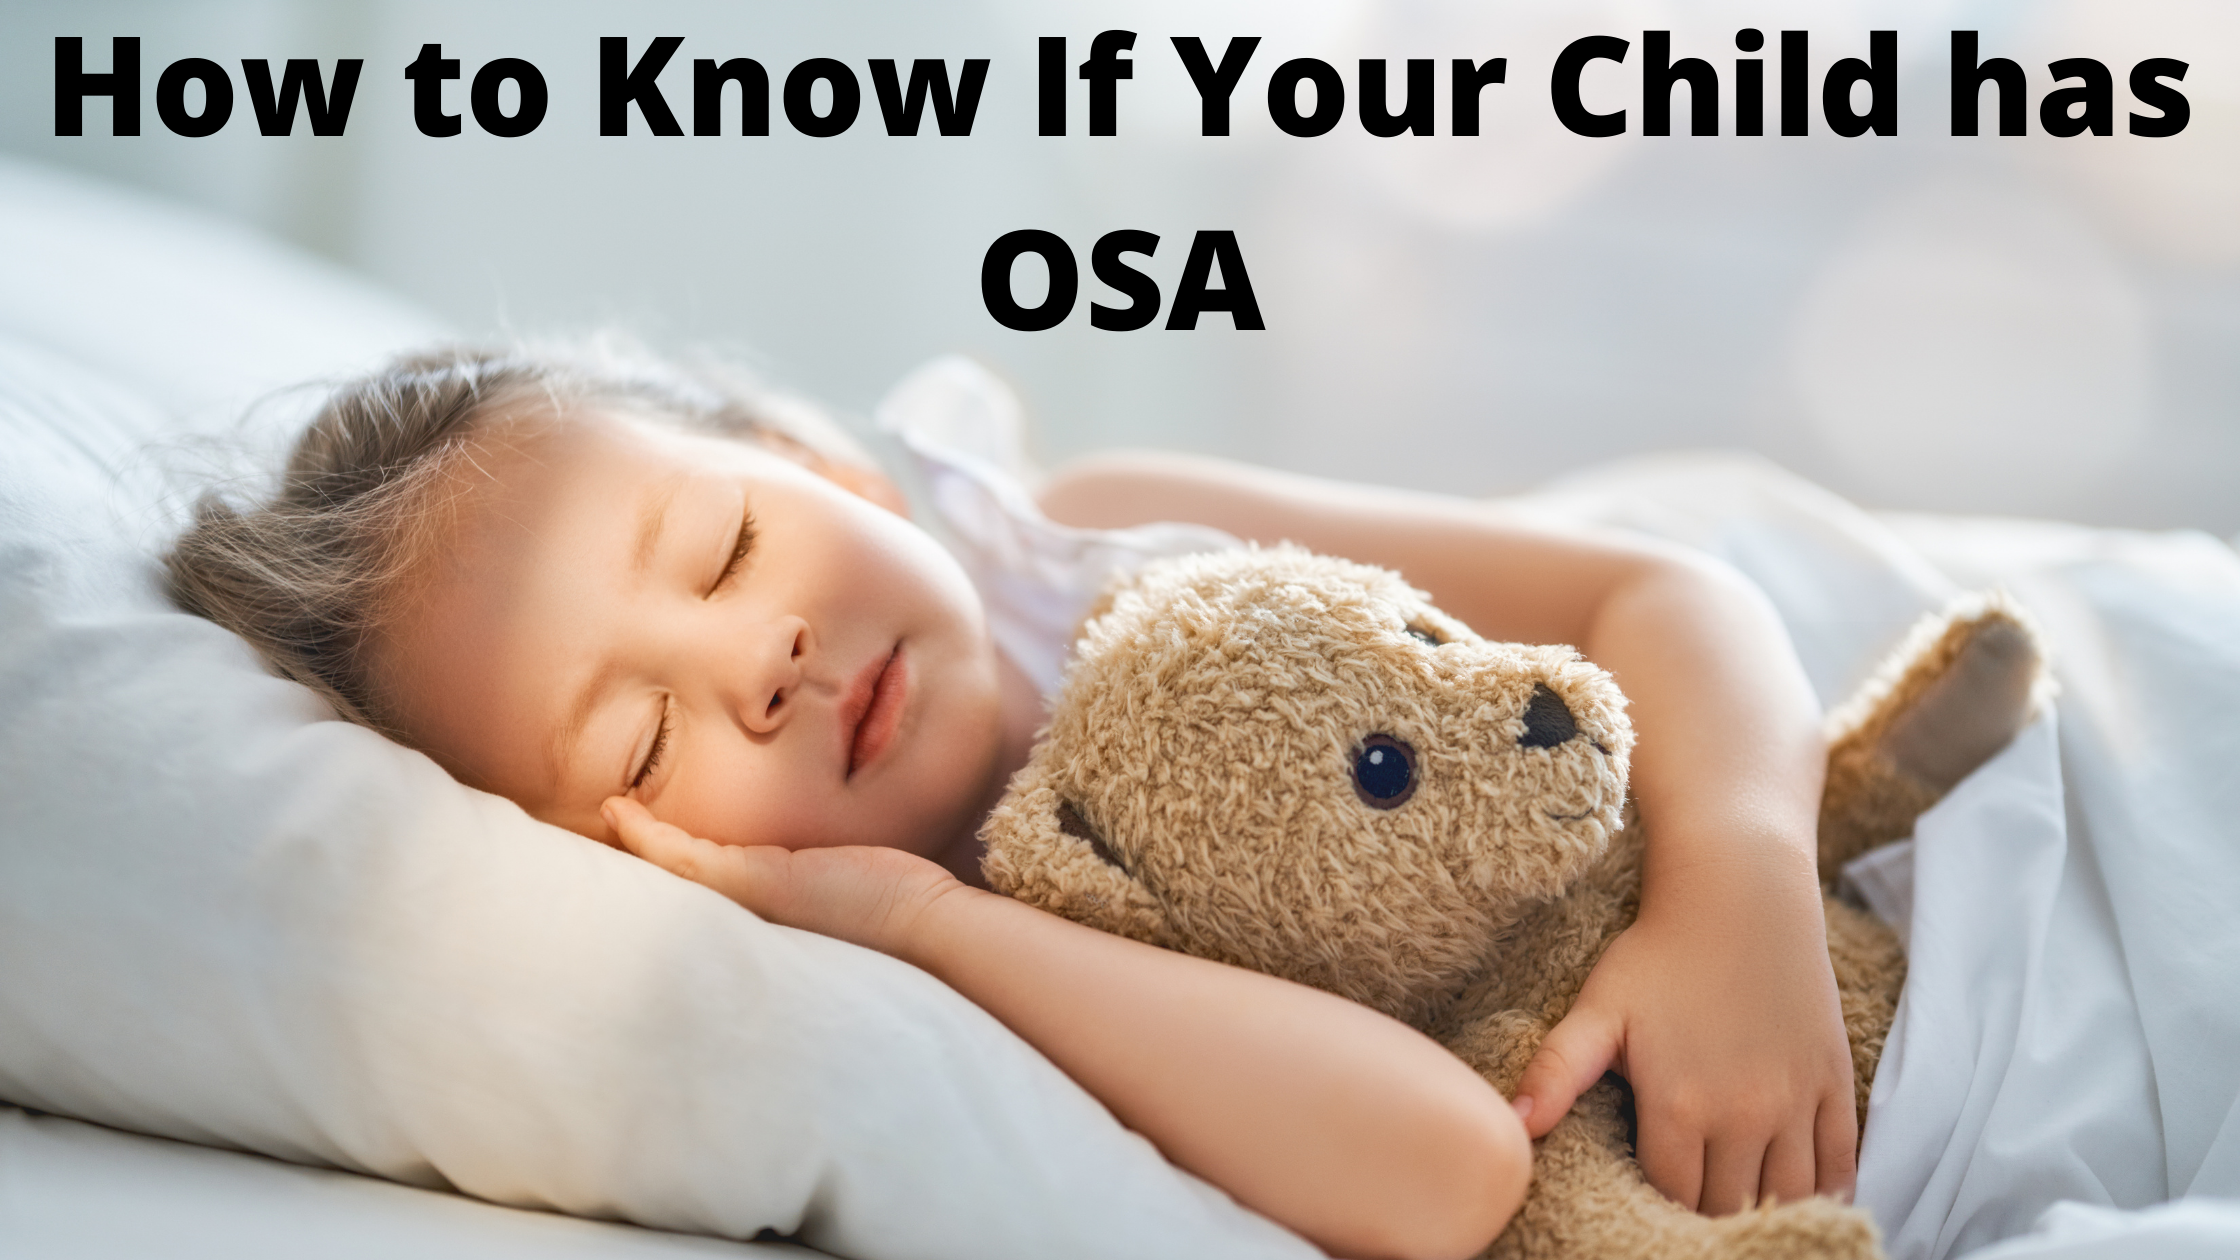 How to Know If Your Child has OSA